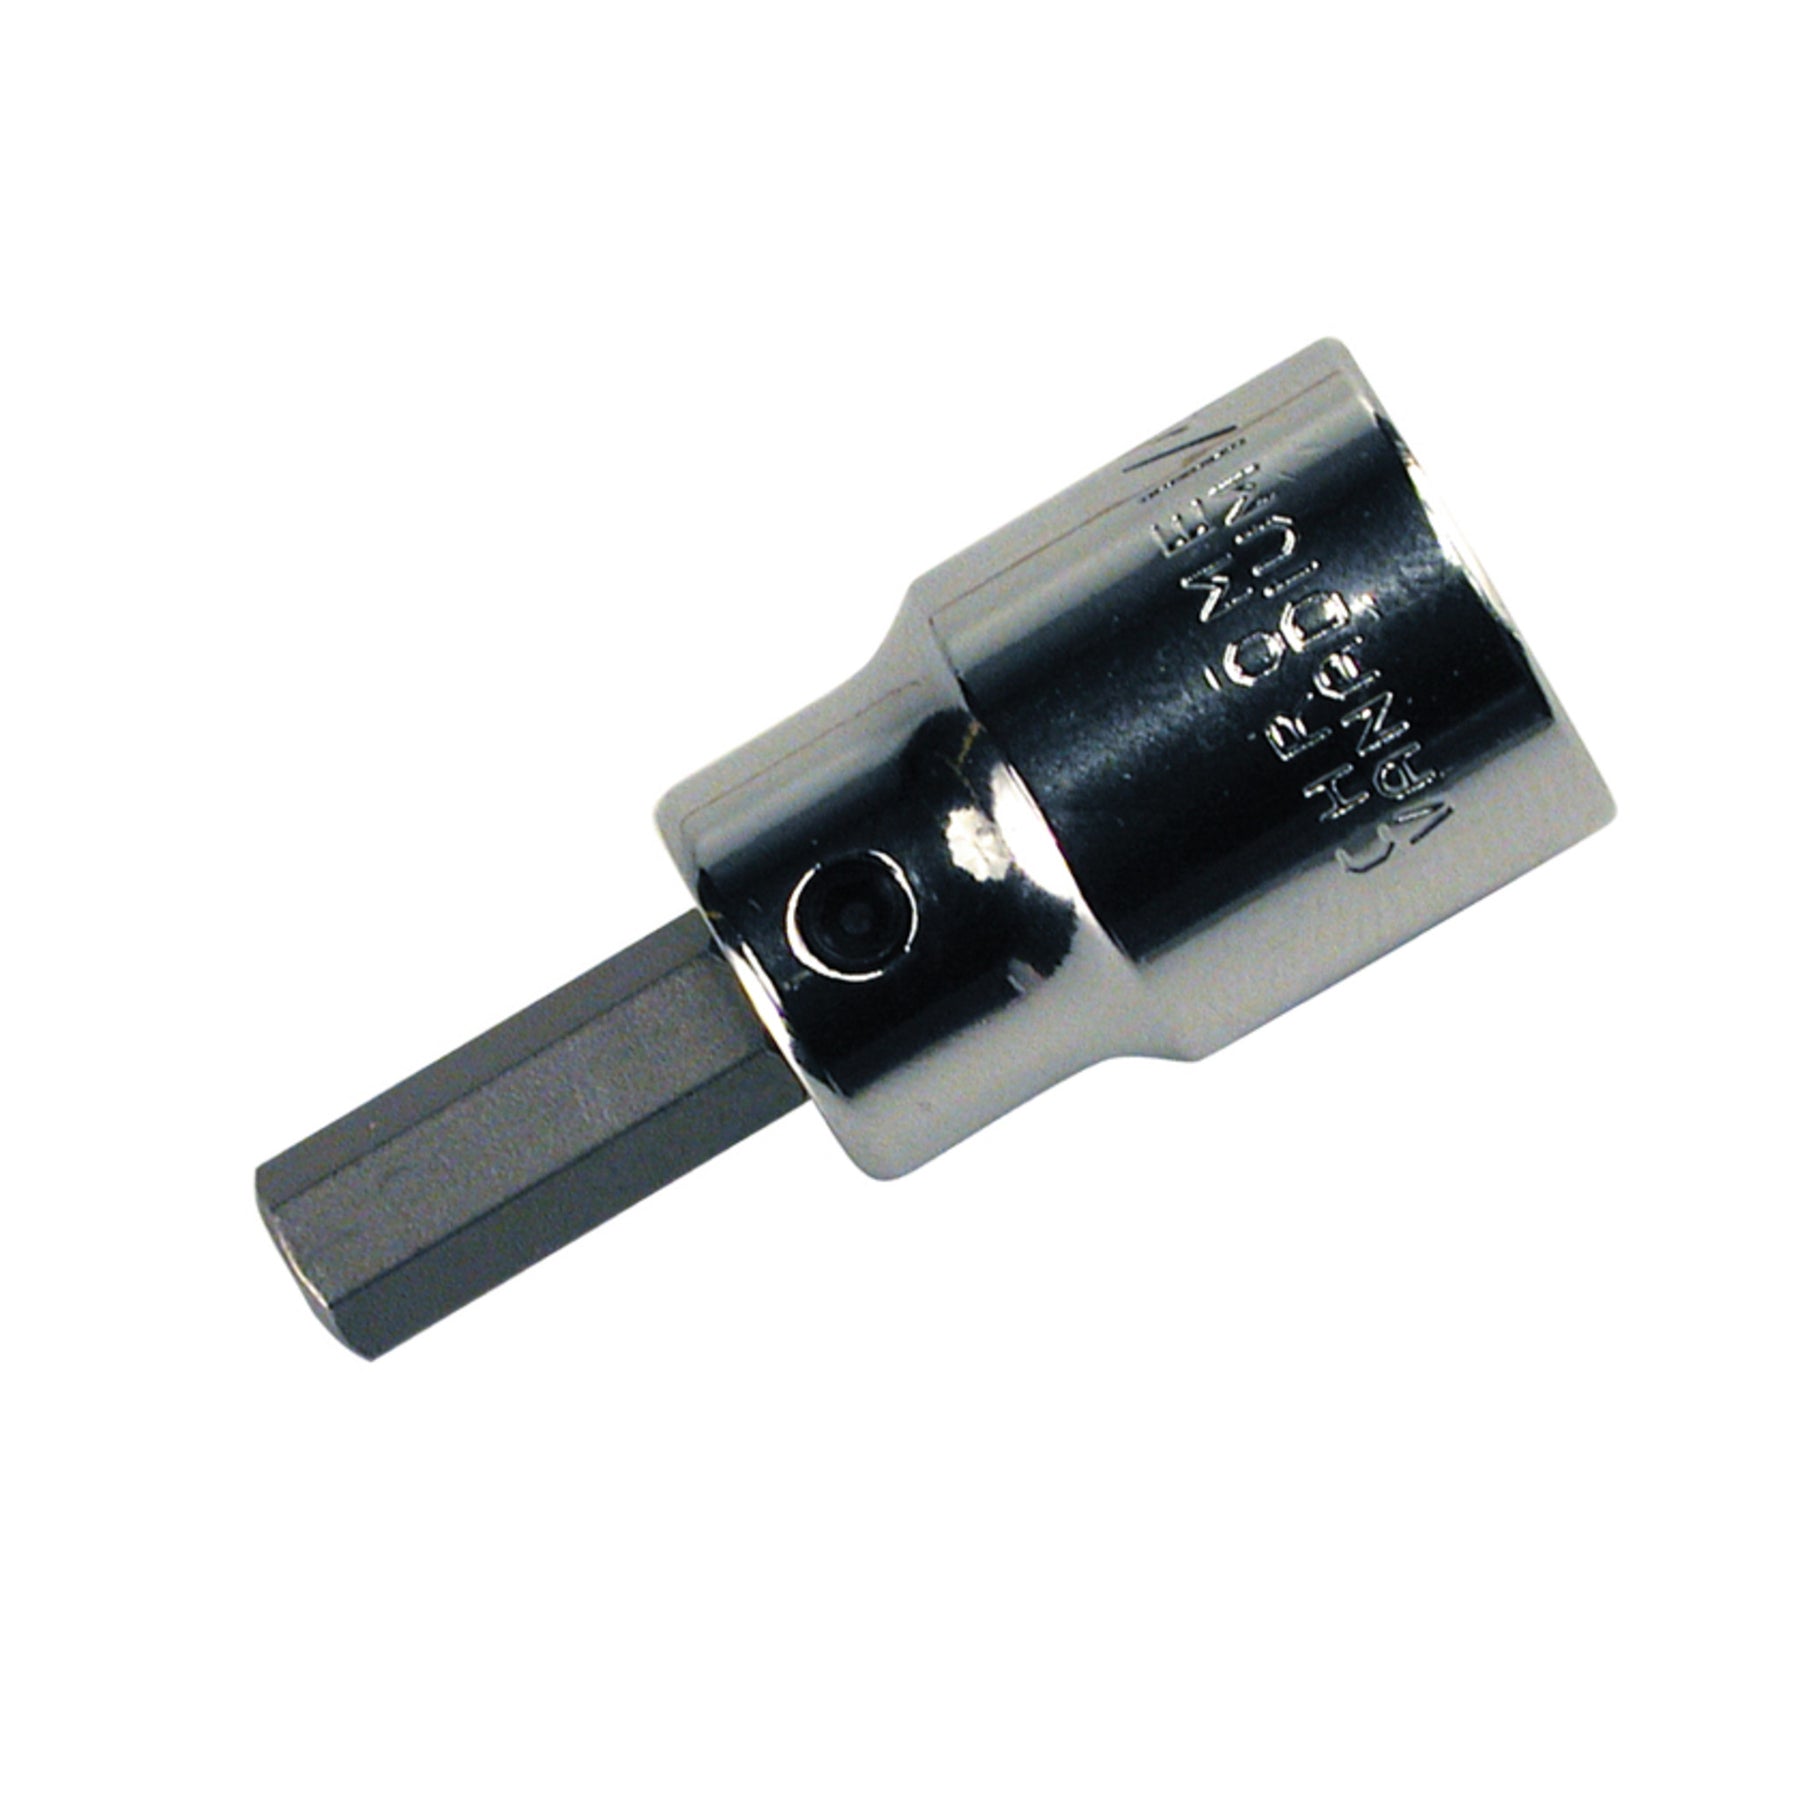 Security Hex BitSocket 3/8" Drive 1/4"